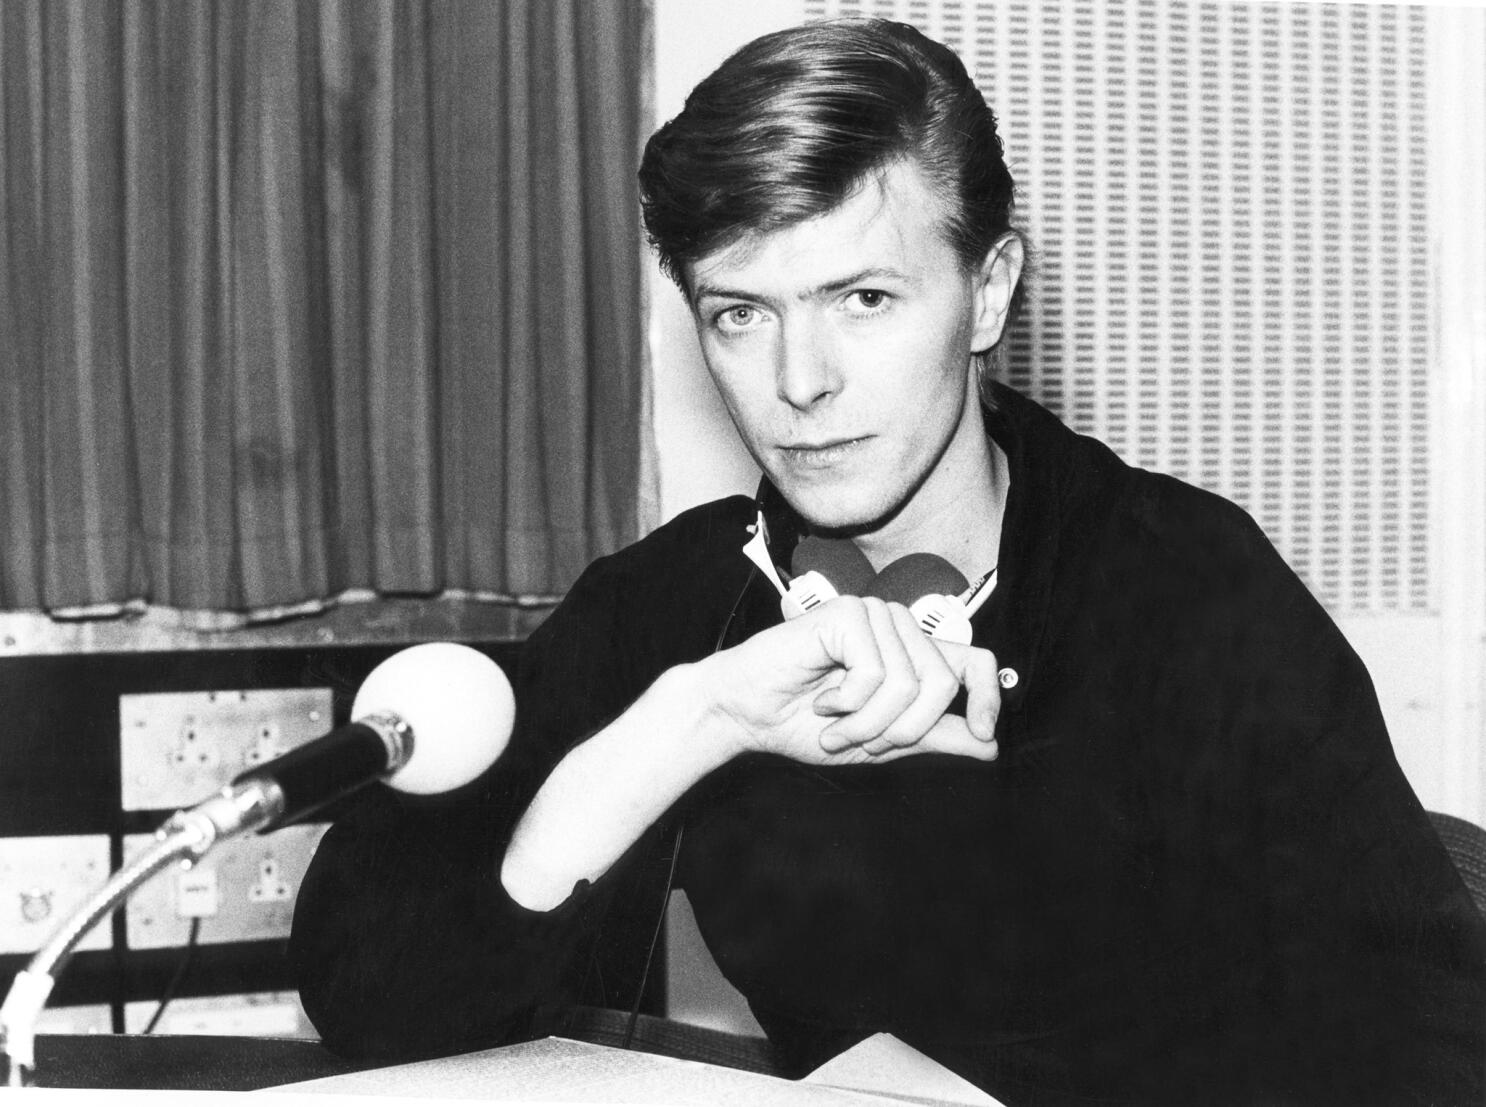 David Bowie, 69, barrier-breaking rock star and actor, has died 